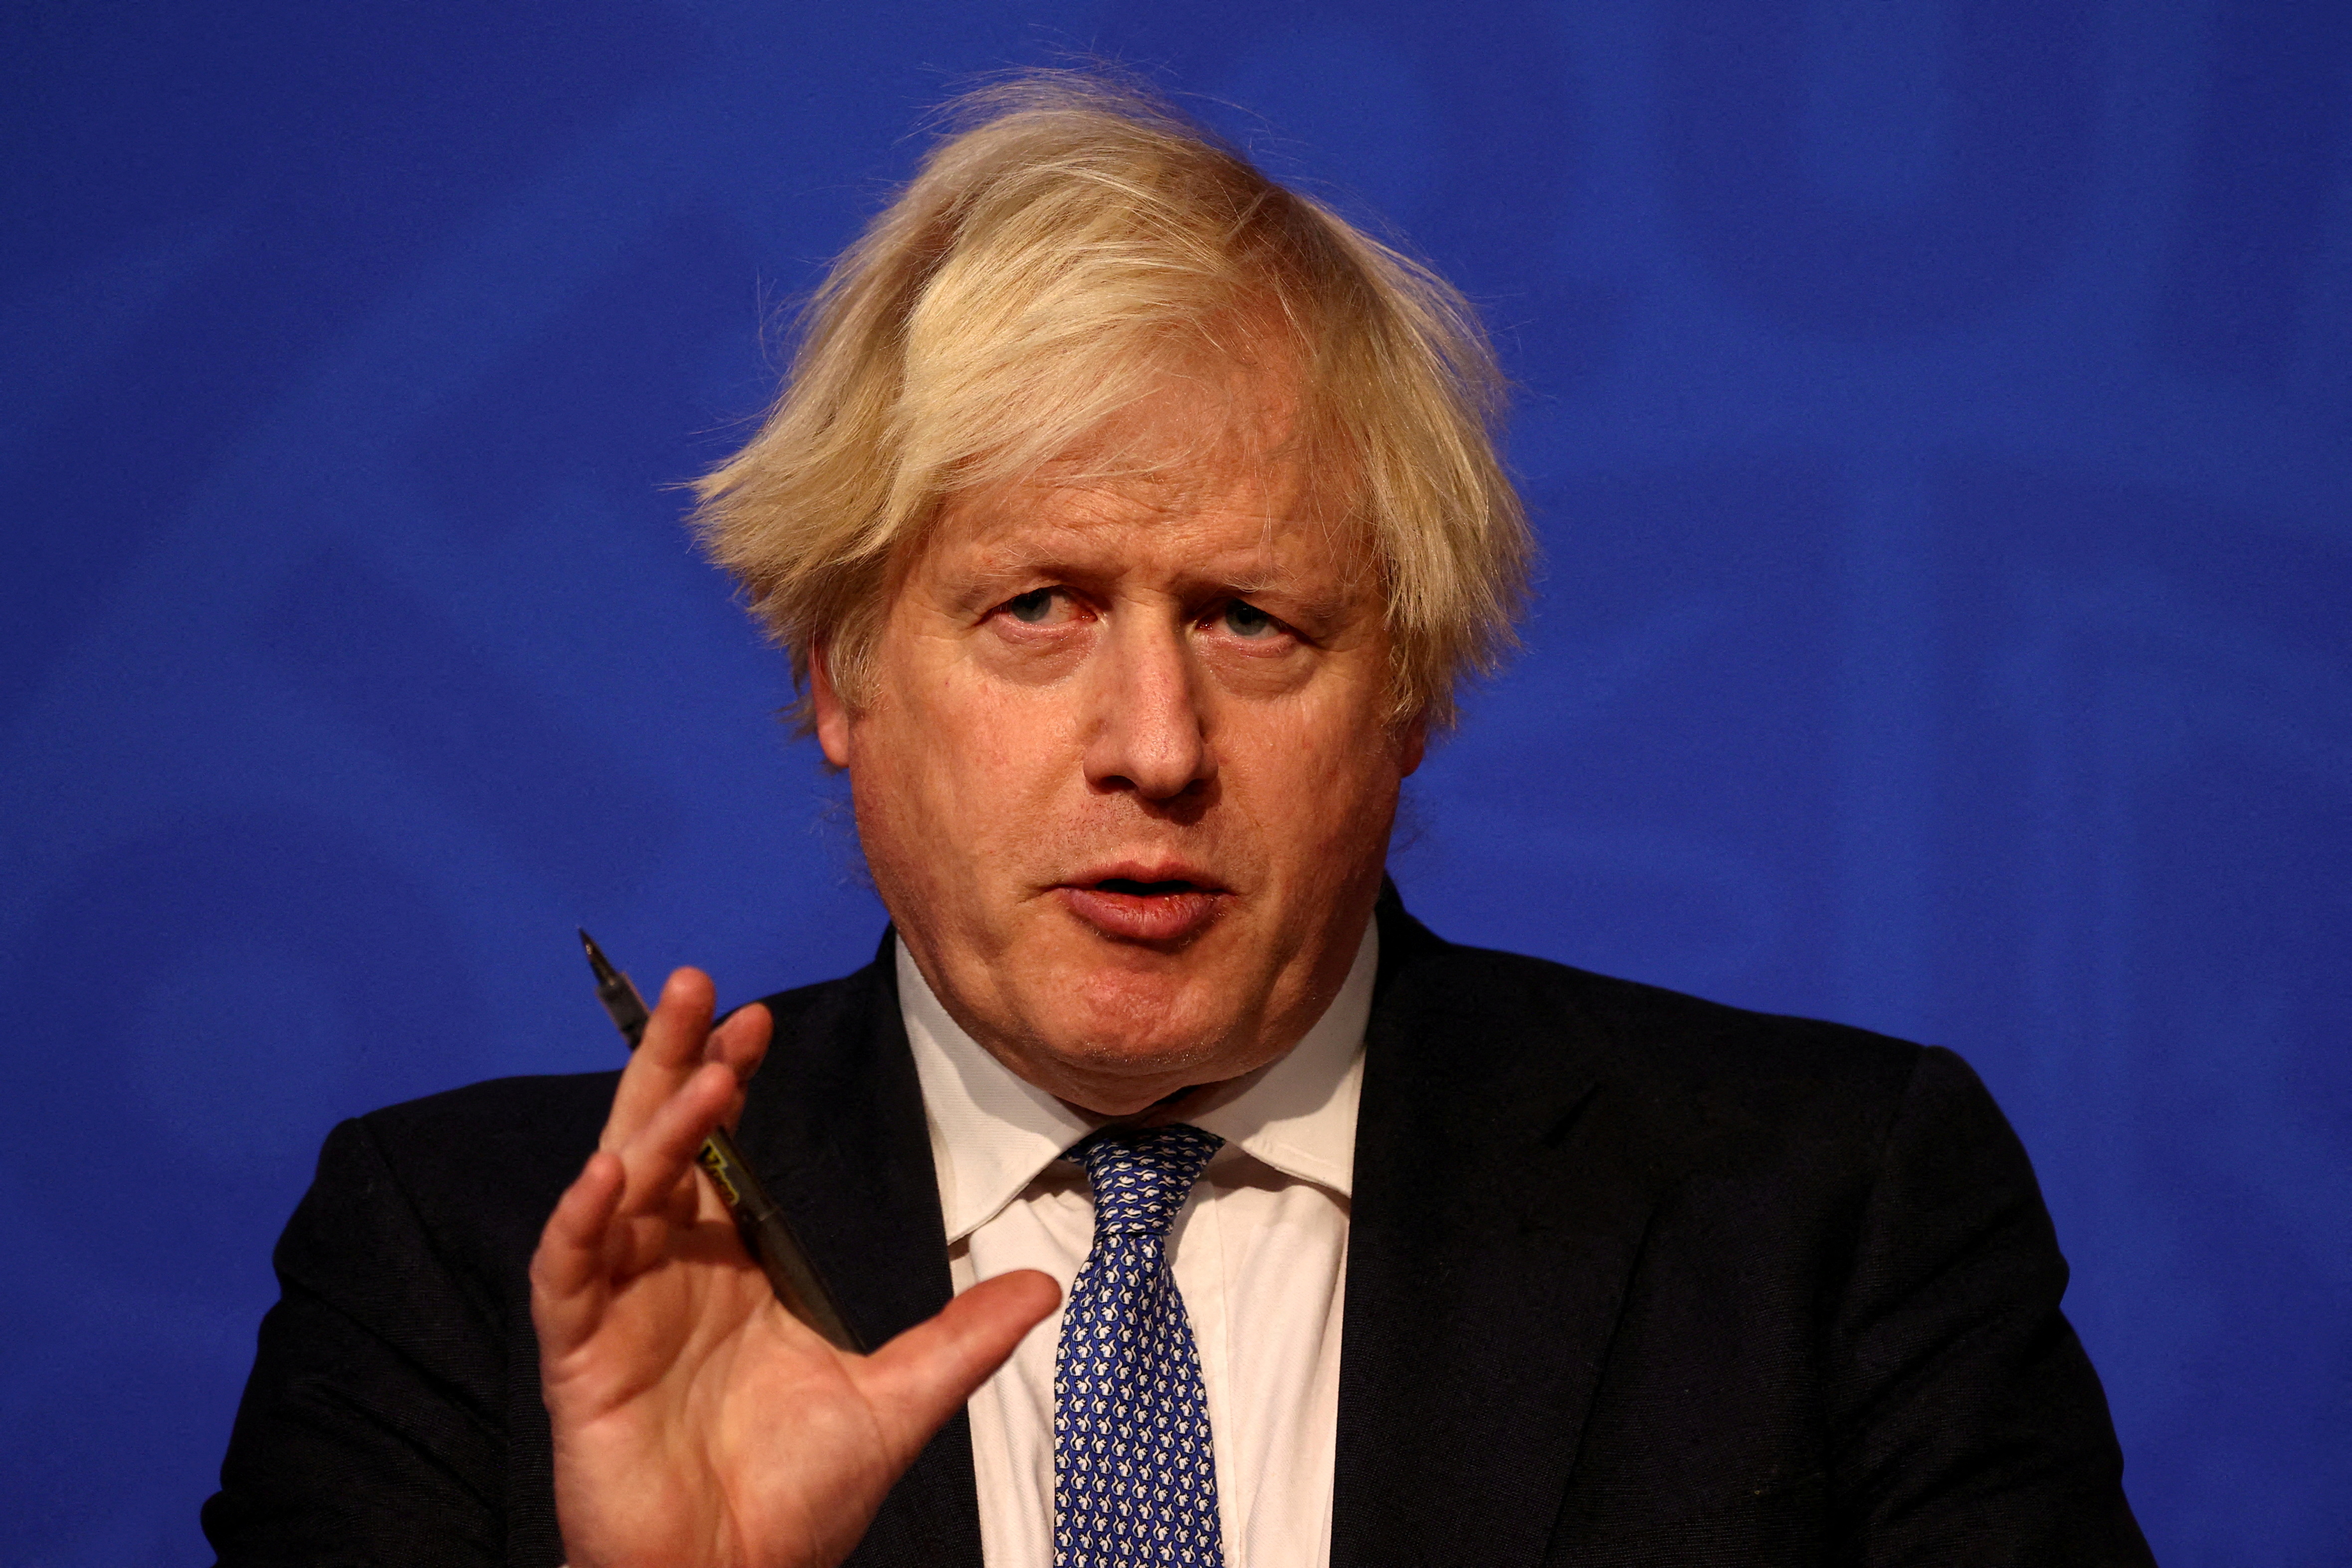 British Prime Minister Boris Johnson holds a news conference, in London